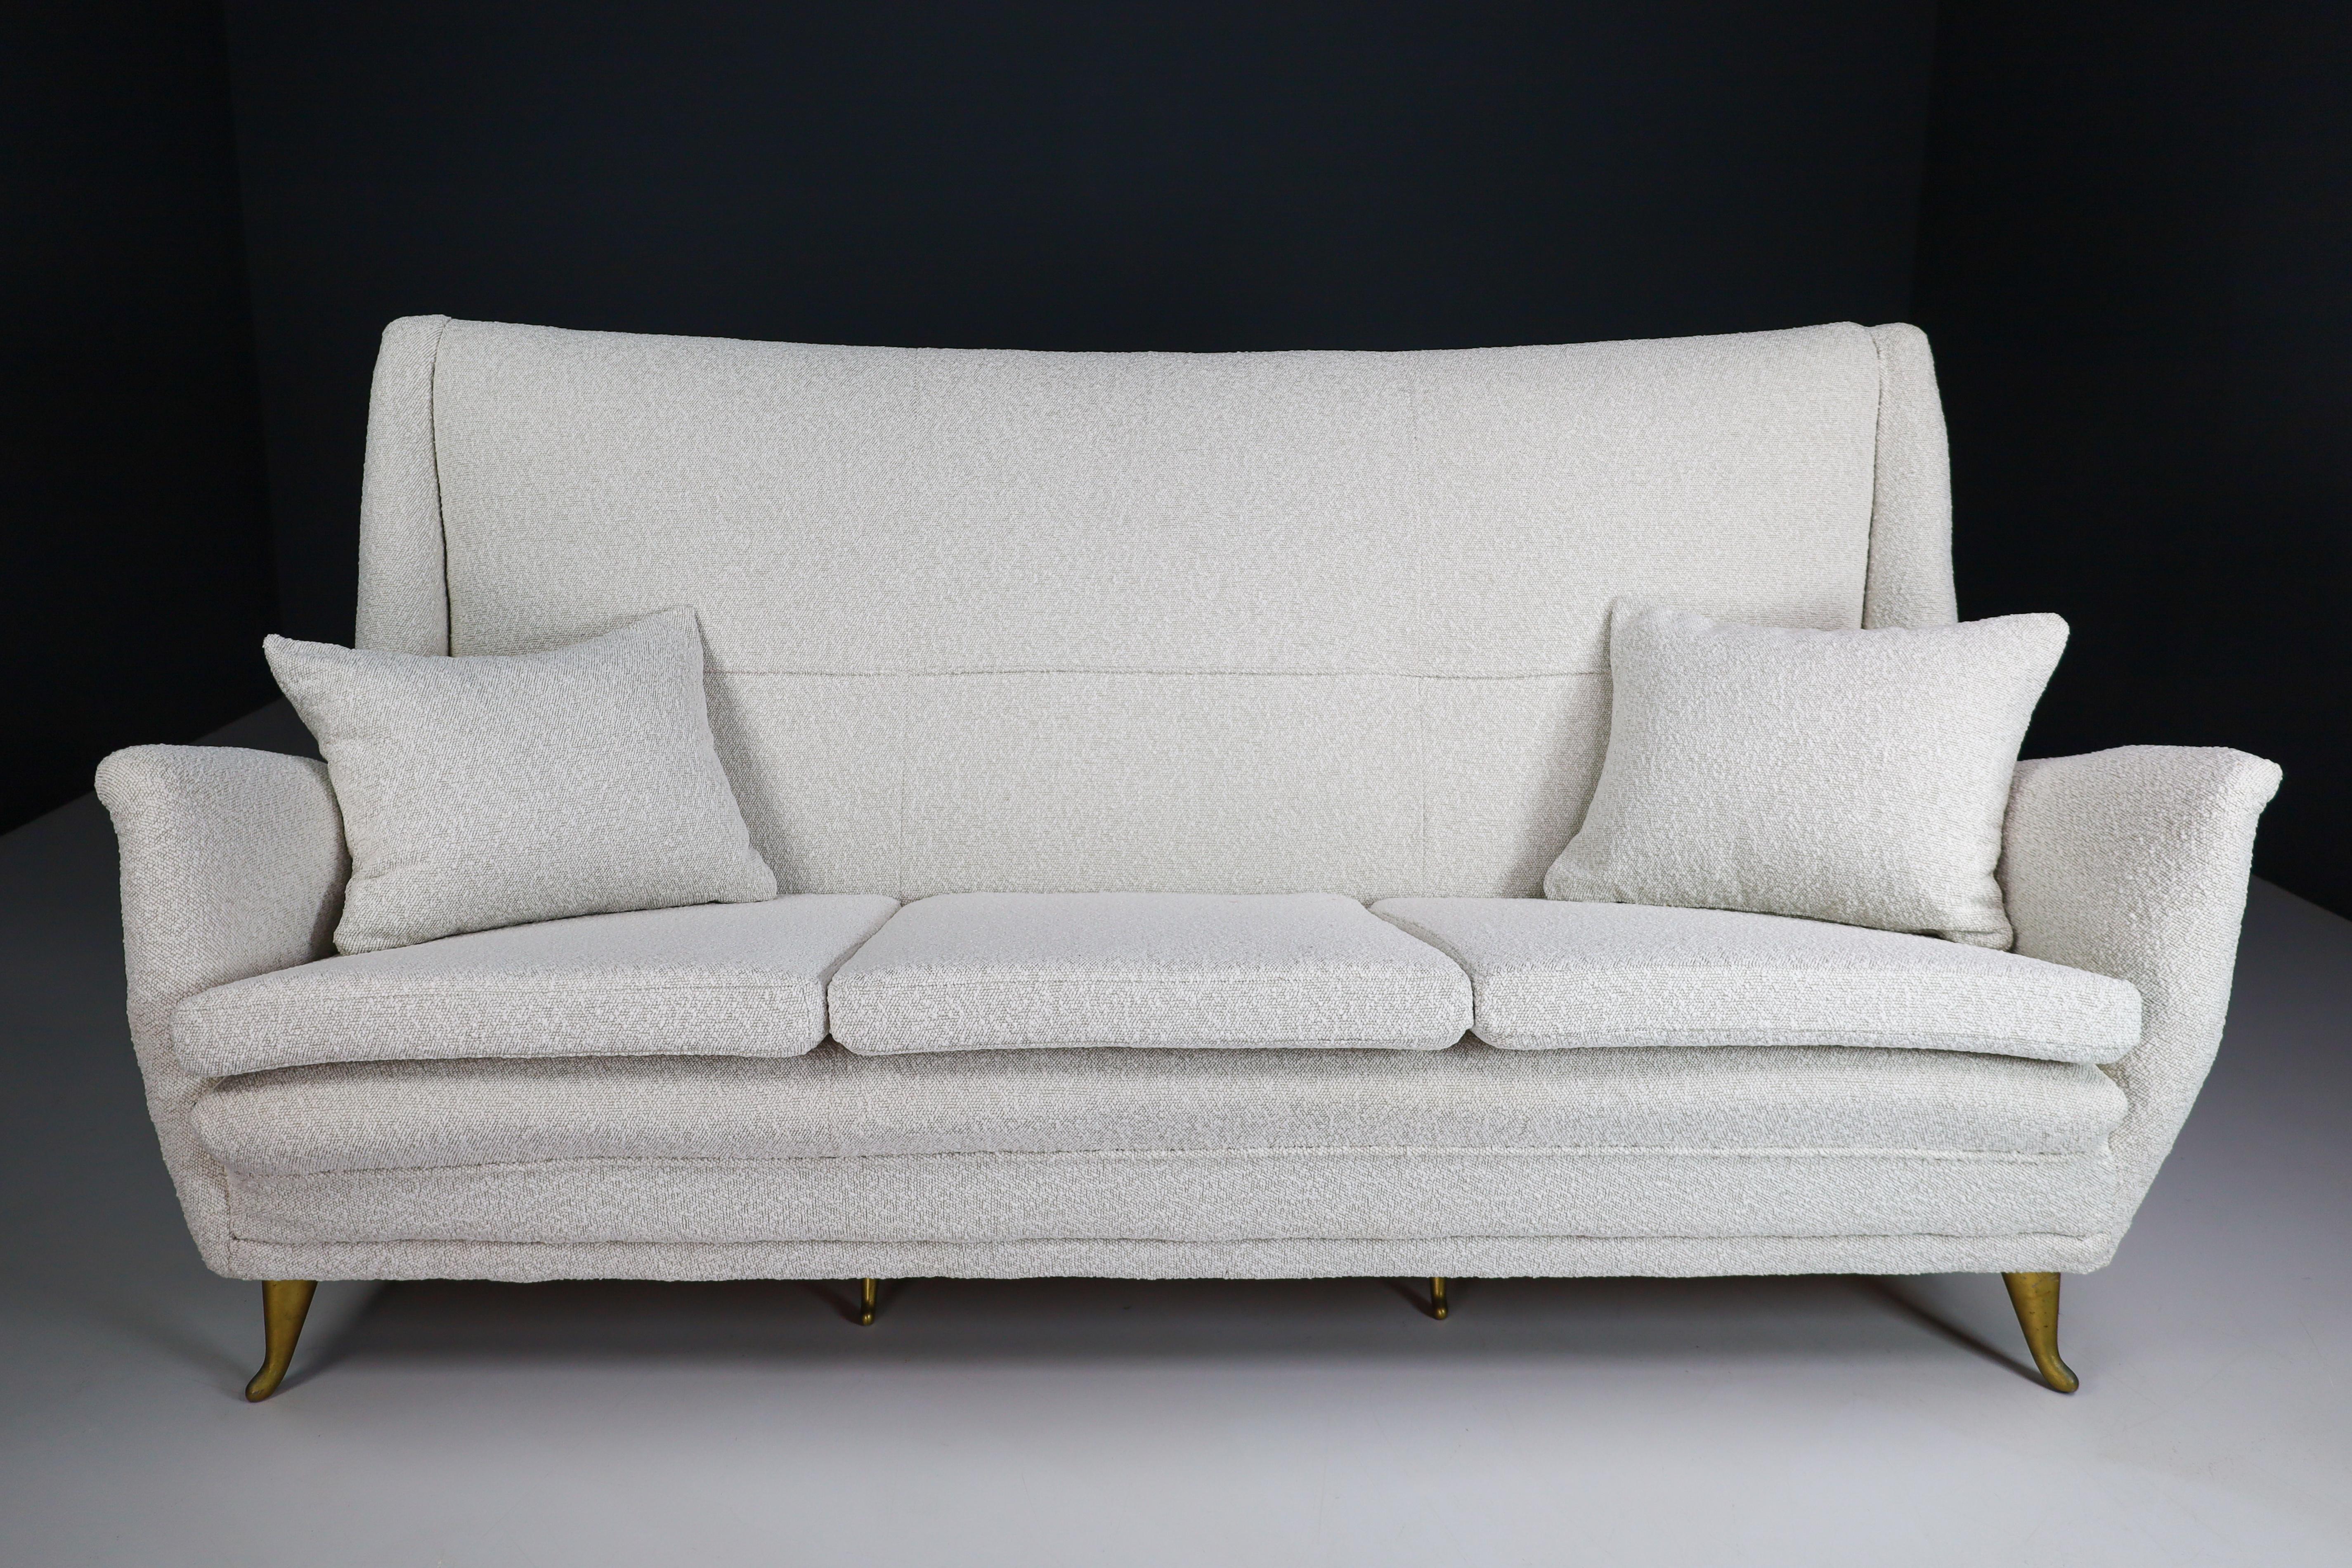 High Back Sofa By Gio Ponti For ISA Bergamo in Bouclé Fabric Upholstery 1950s For Sale 8